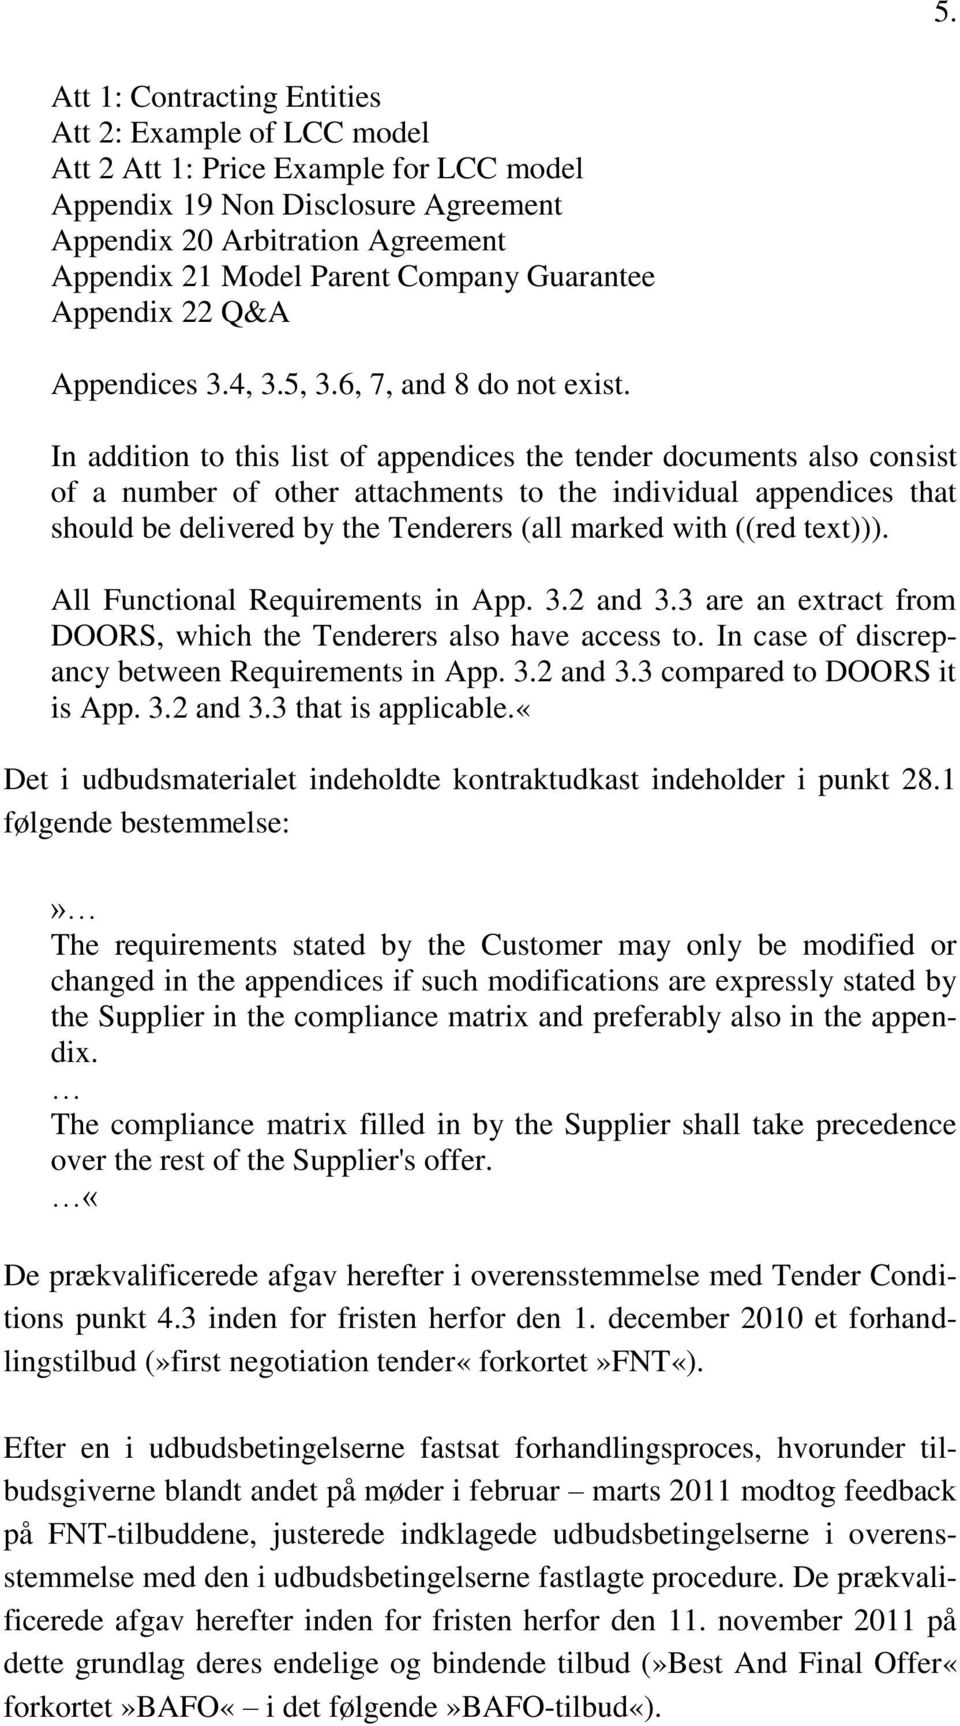 In addition to this list of appendices the tender documents also consist of a number of other attachments to the individual appendices that should be delivered by the Tenderers (all marked with ((red